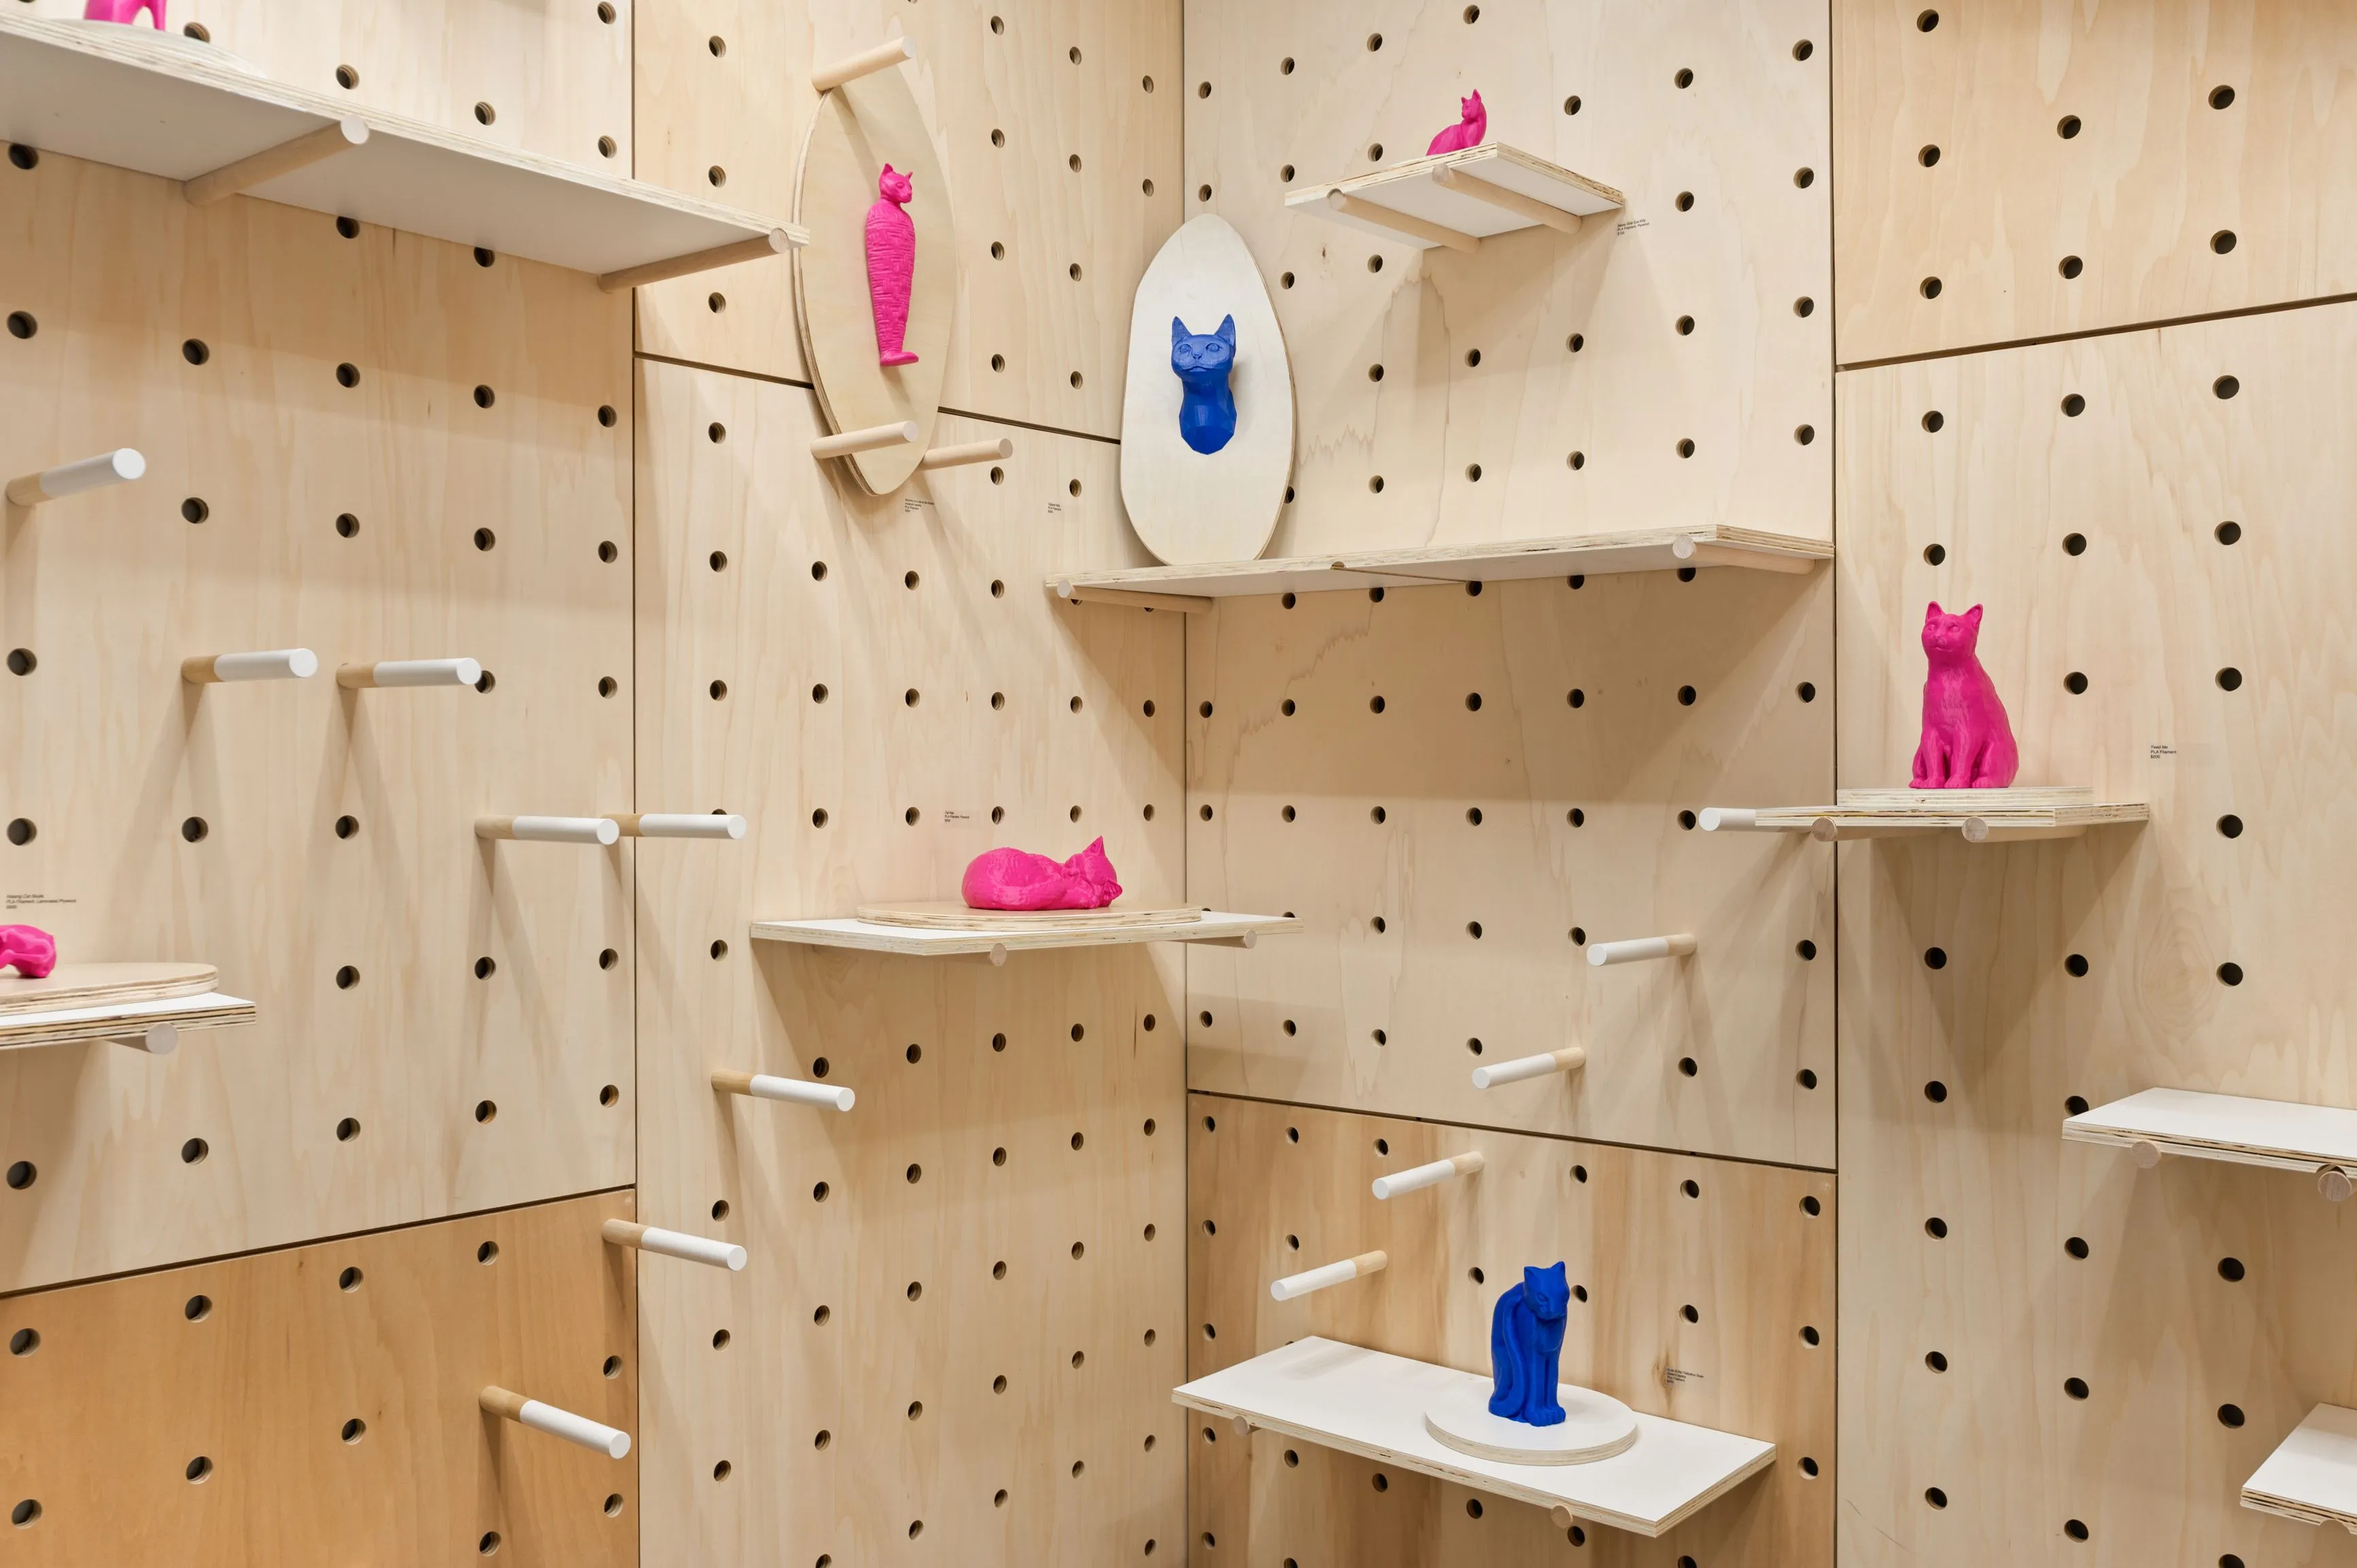 Interior of a room with pegboard walls and floating shelves holding various pink and blue abstract sculptures.